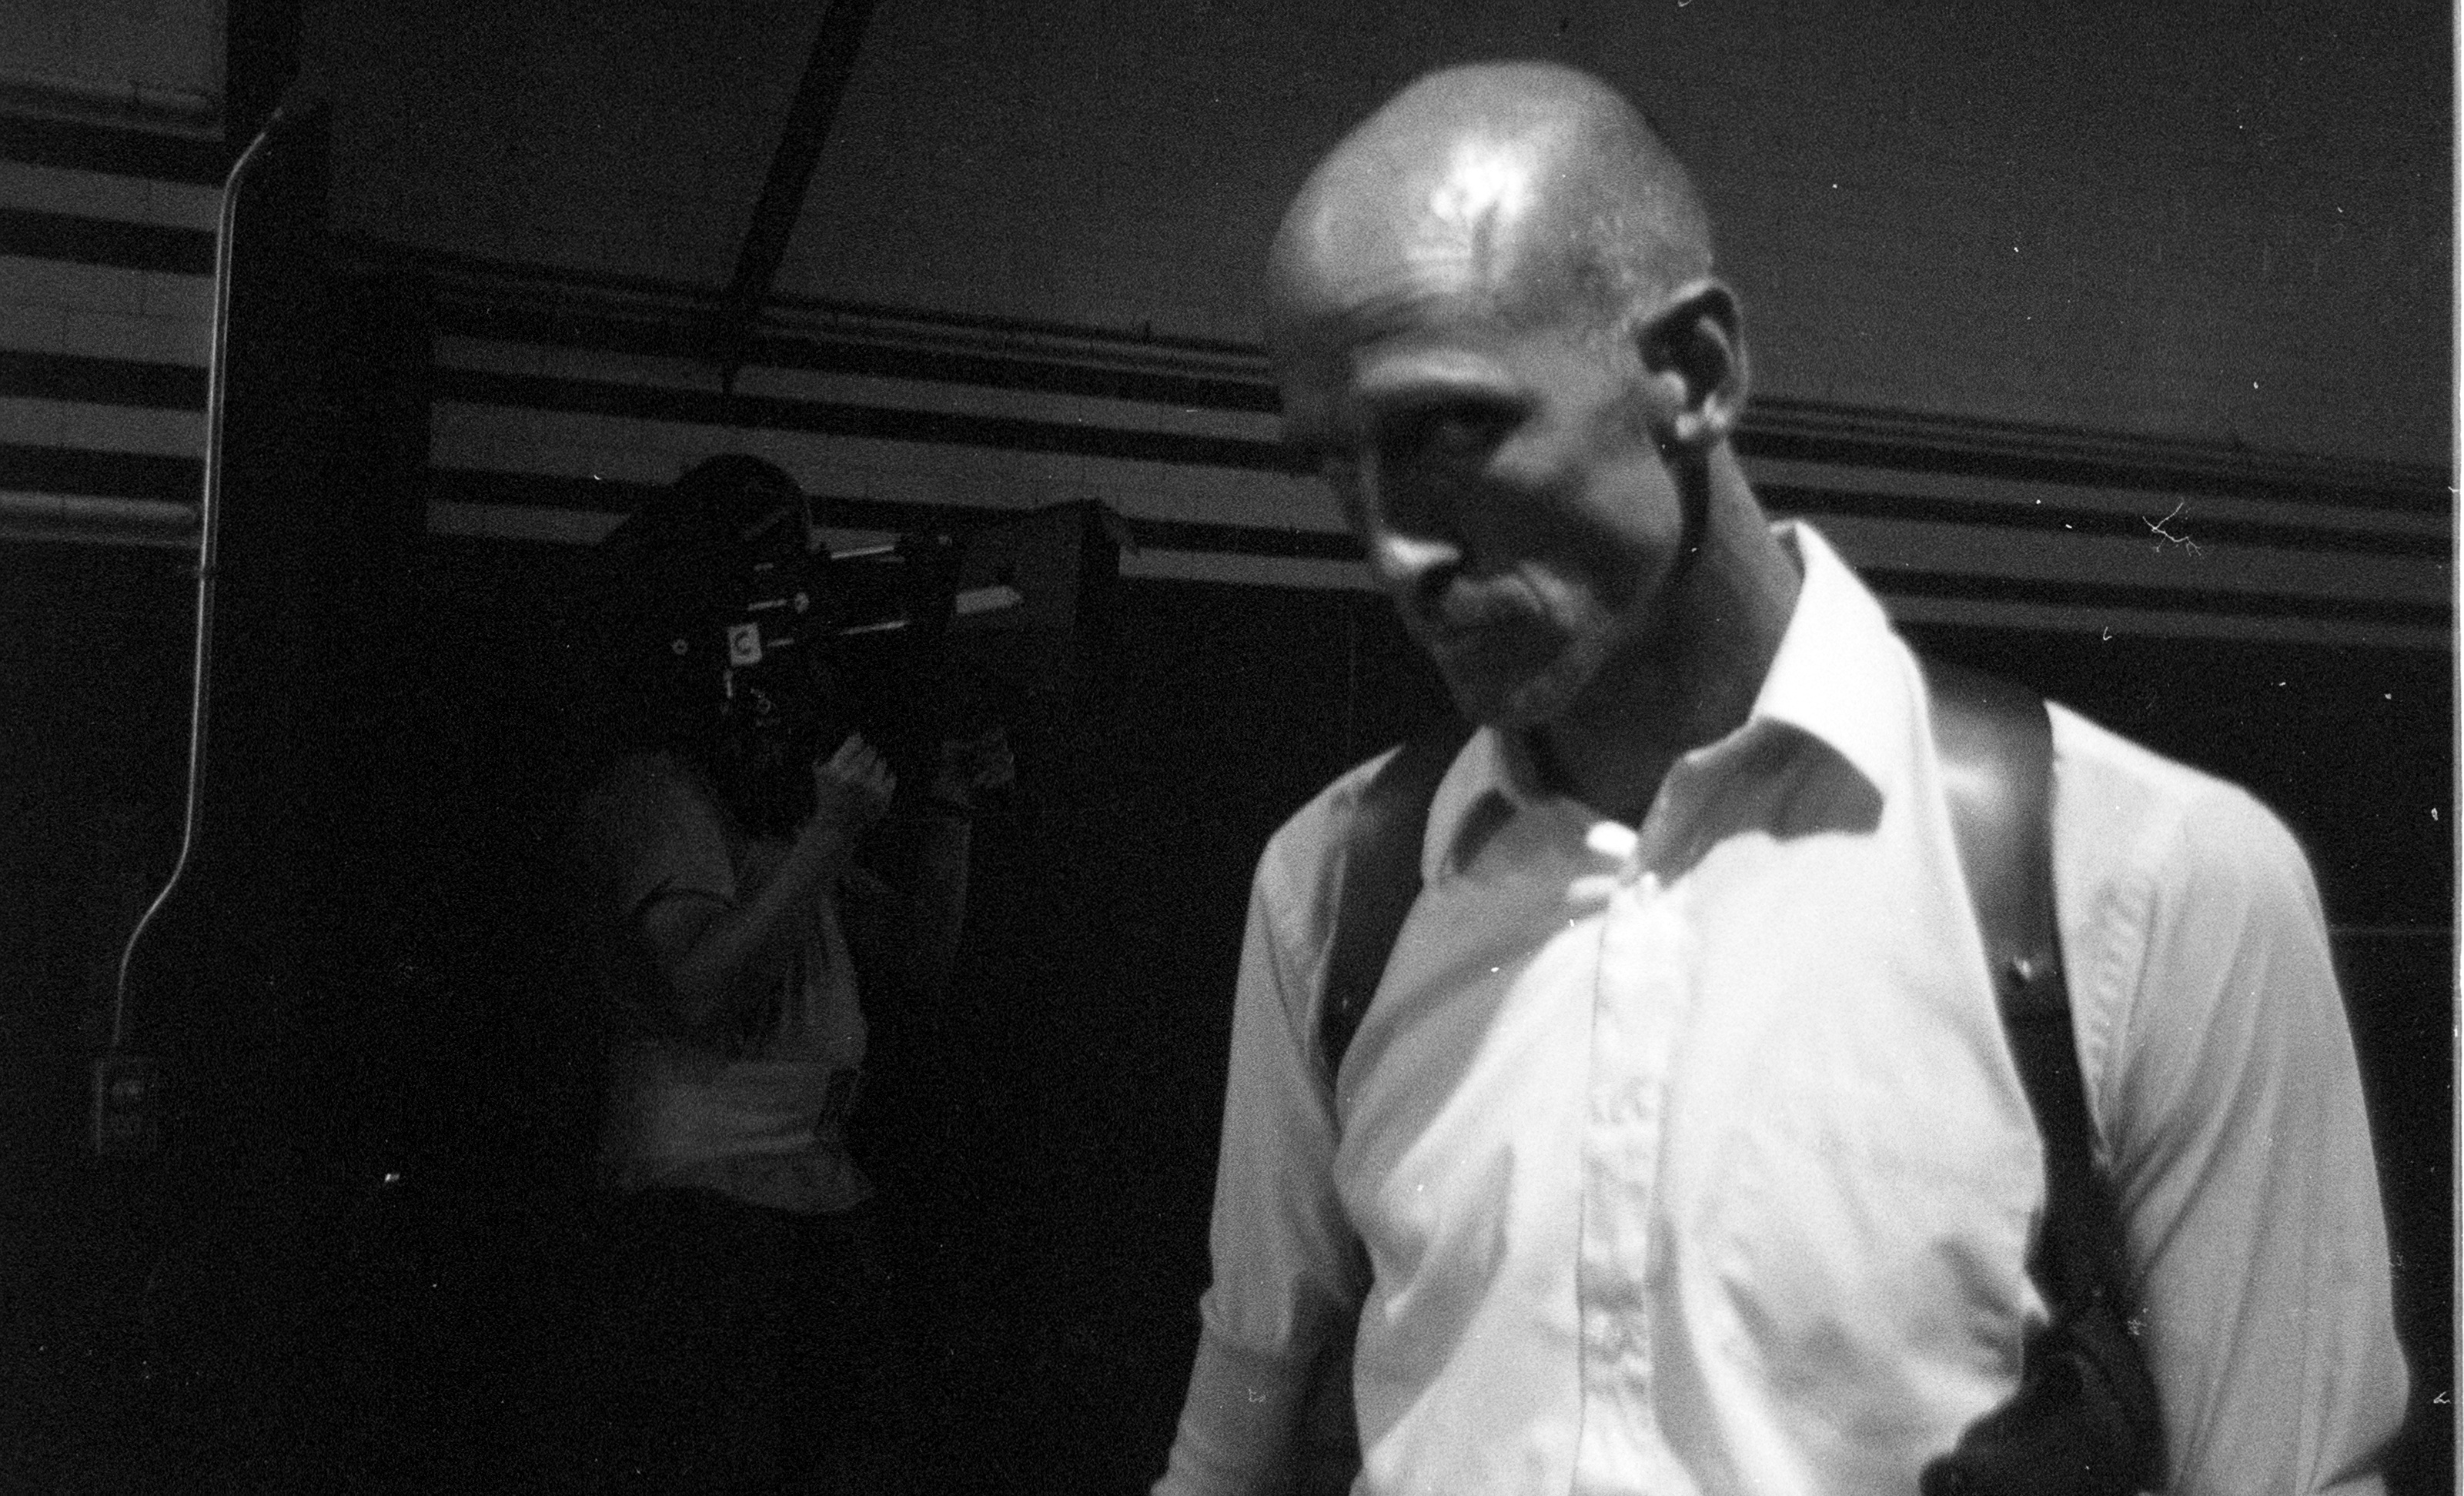 Cully Fredricksen in Camera Obscura. Written and directed by Hamlet Sarkissian.